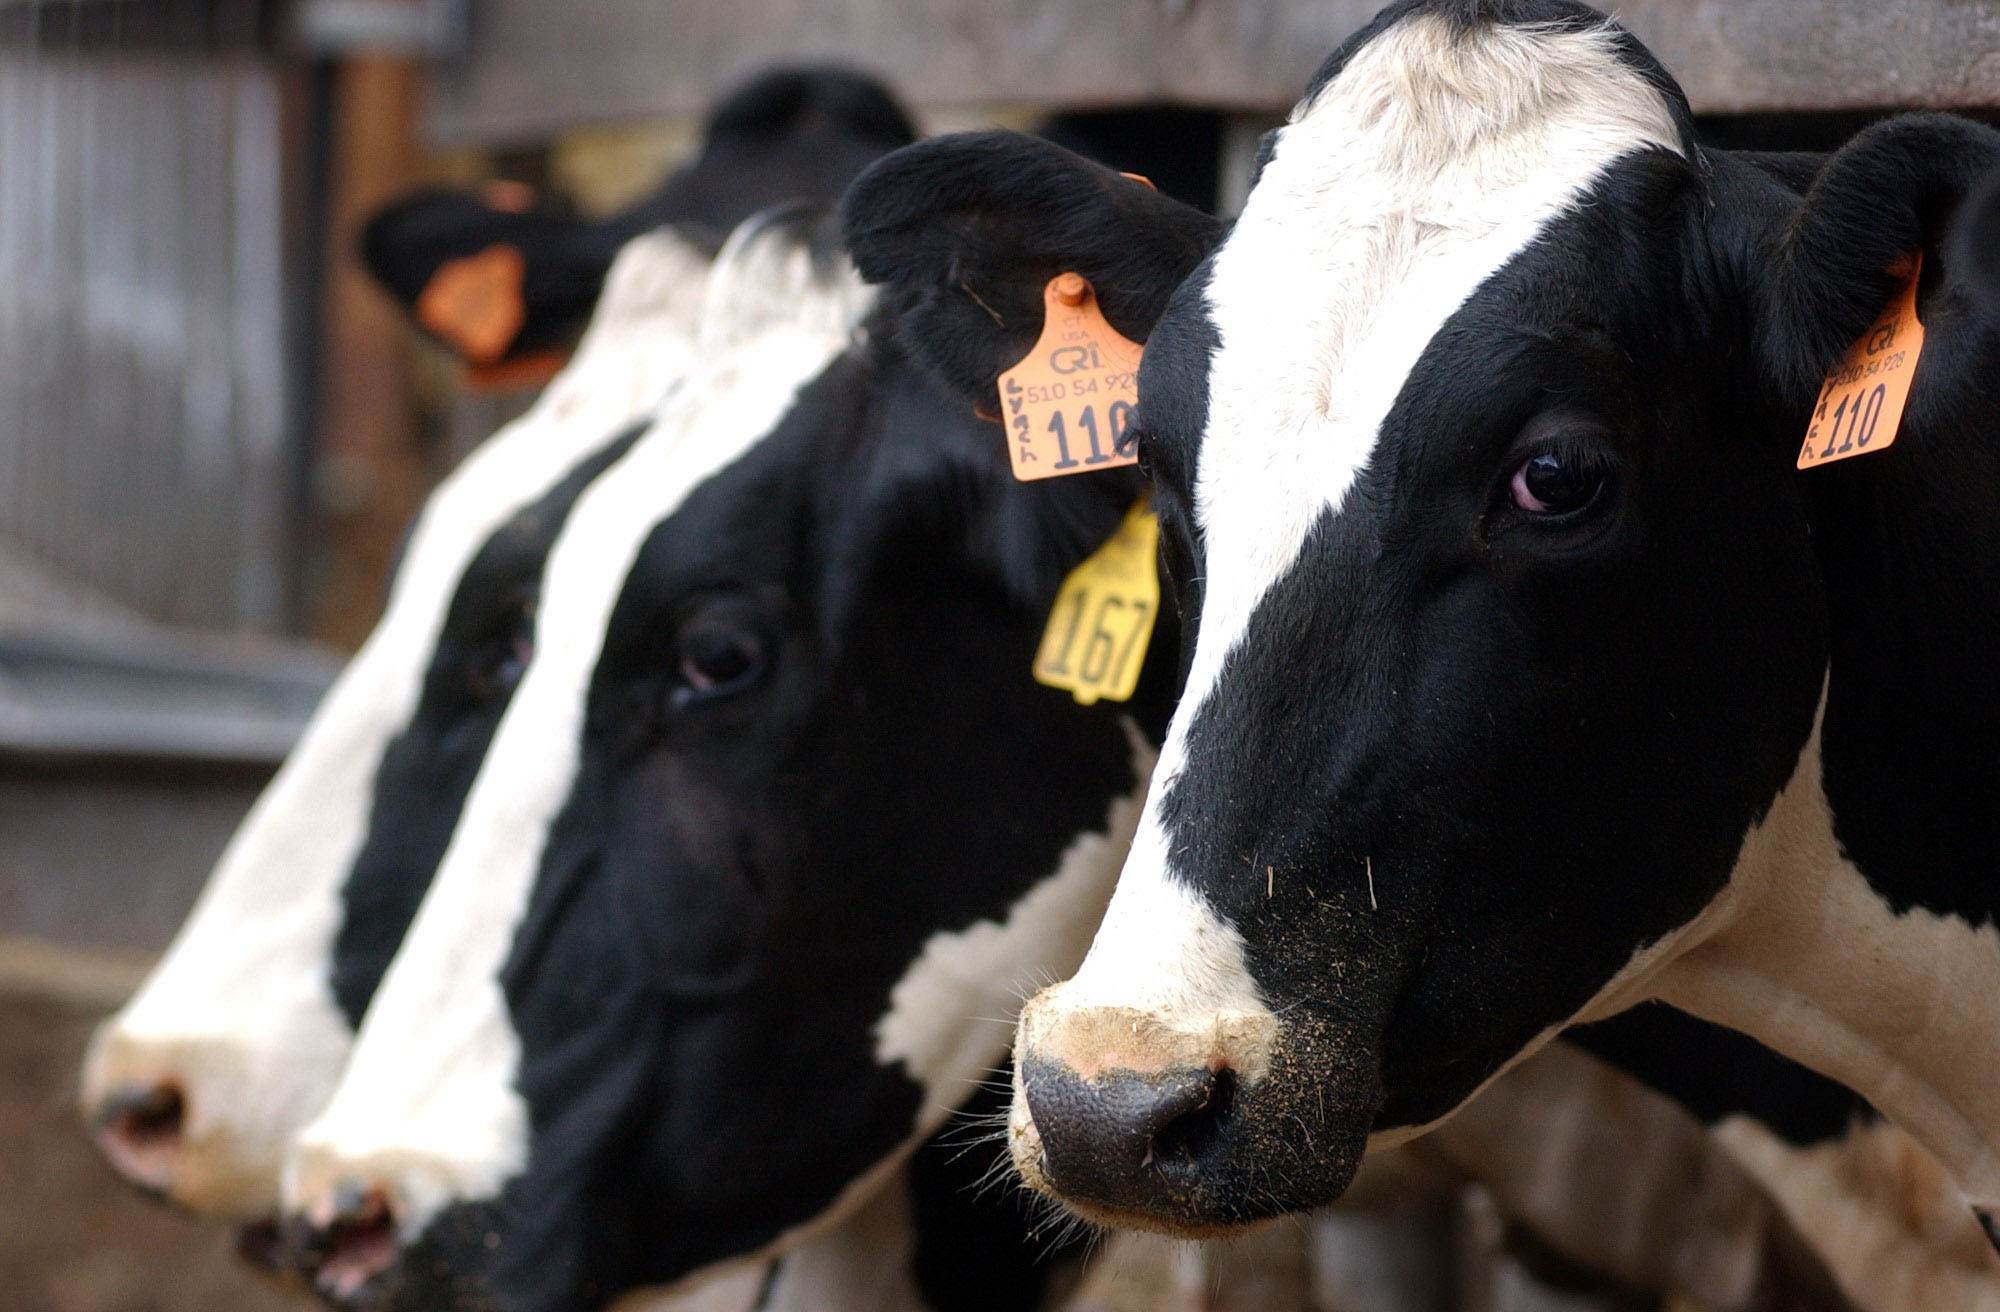 Controversial dairy CAFO in Kewaunee County could have up to 15K cows under proposed permit changes